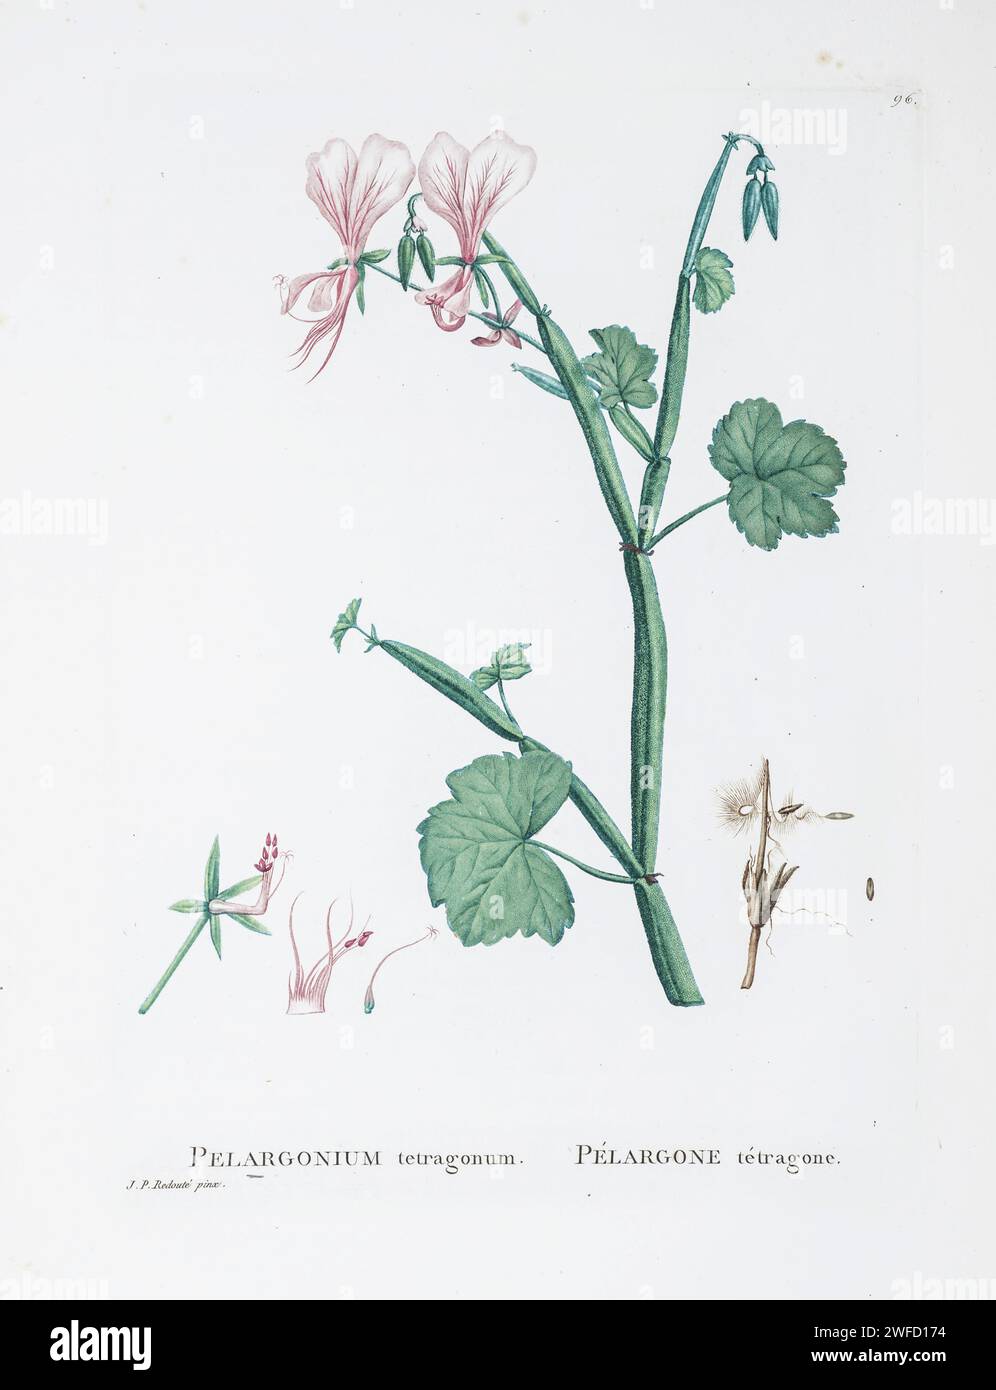 Pelargonium tetragonum from History of Succulent Plants [Plantarum historia succulentarum / Histoire des plantes grasses] painted by Pierre-Joseph Redouté and described by Augustin Pyramus de Candolle 1799 Stock Photo